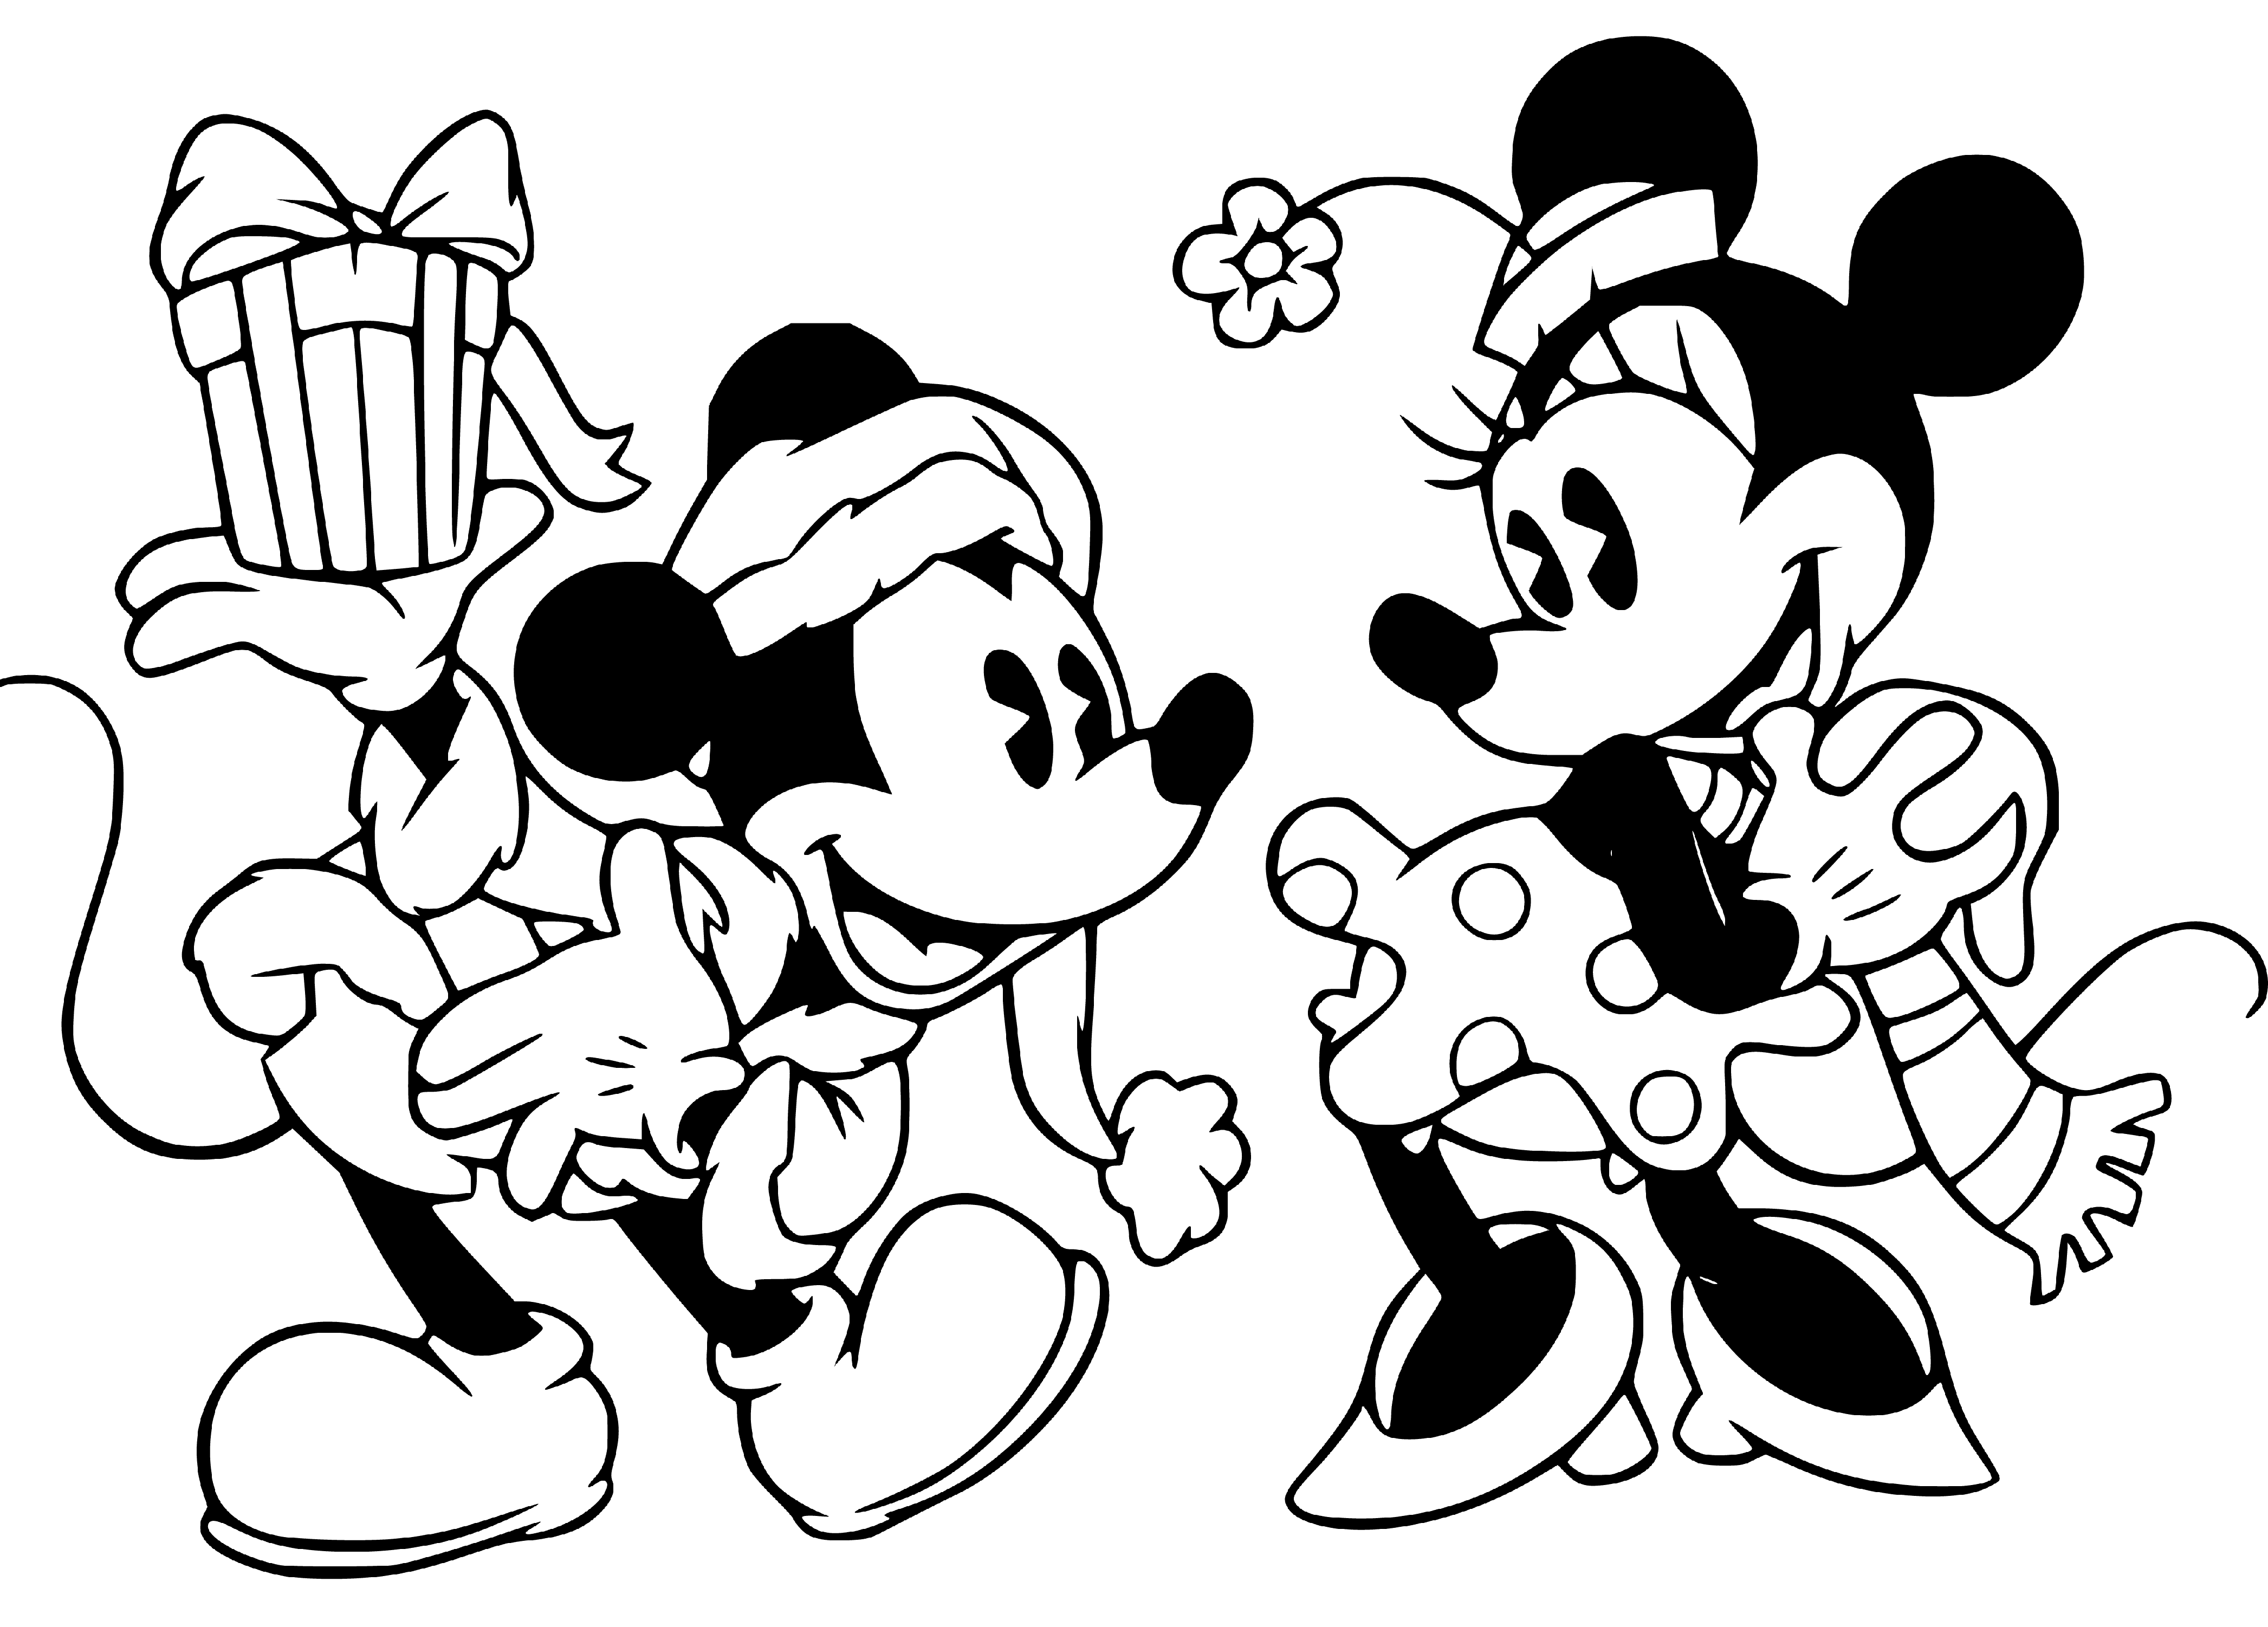 Mickey and Minnie Mouse Coloring Page for Kids Printable - SheetalColor.com